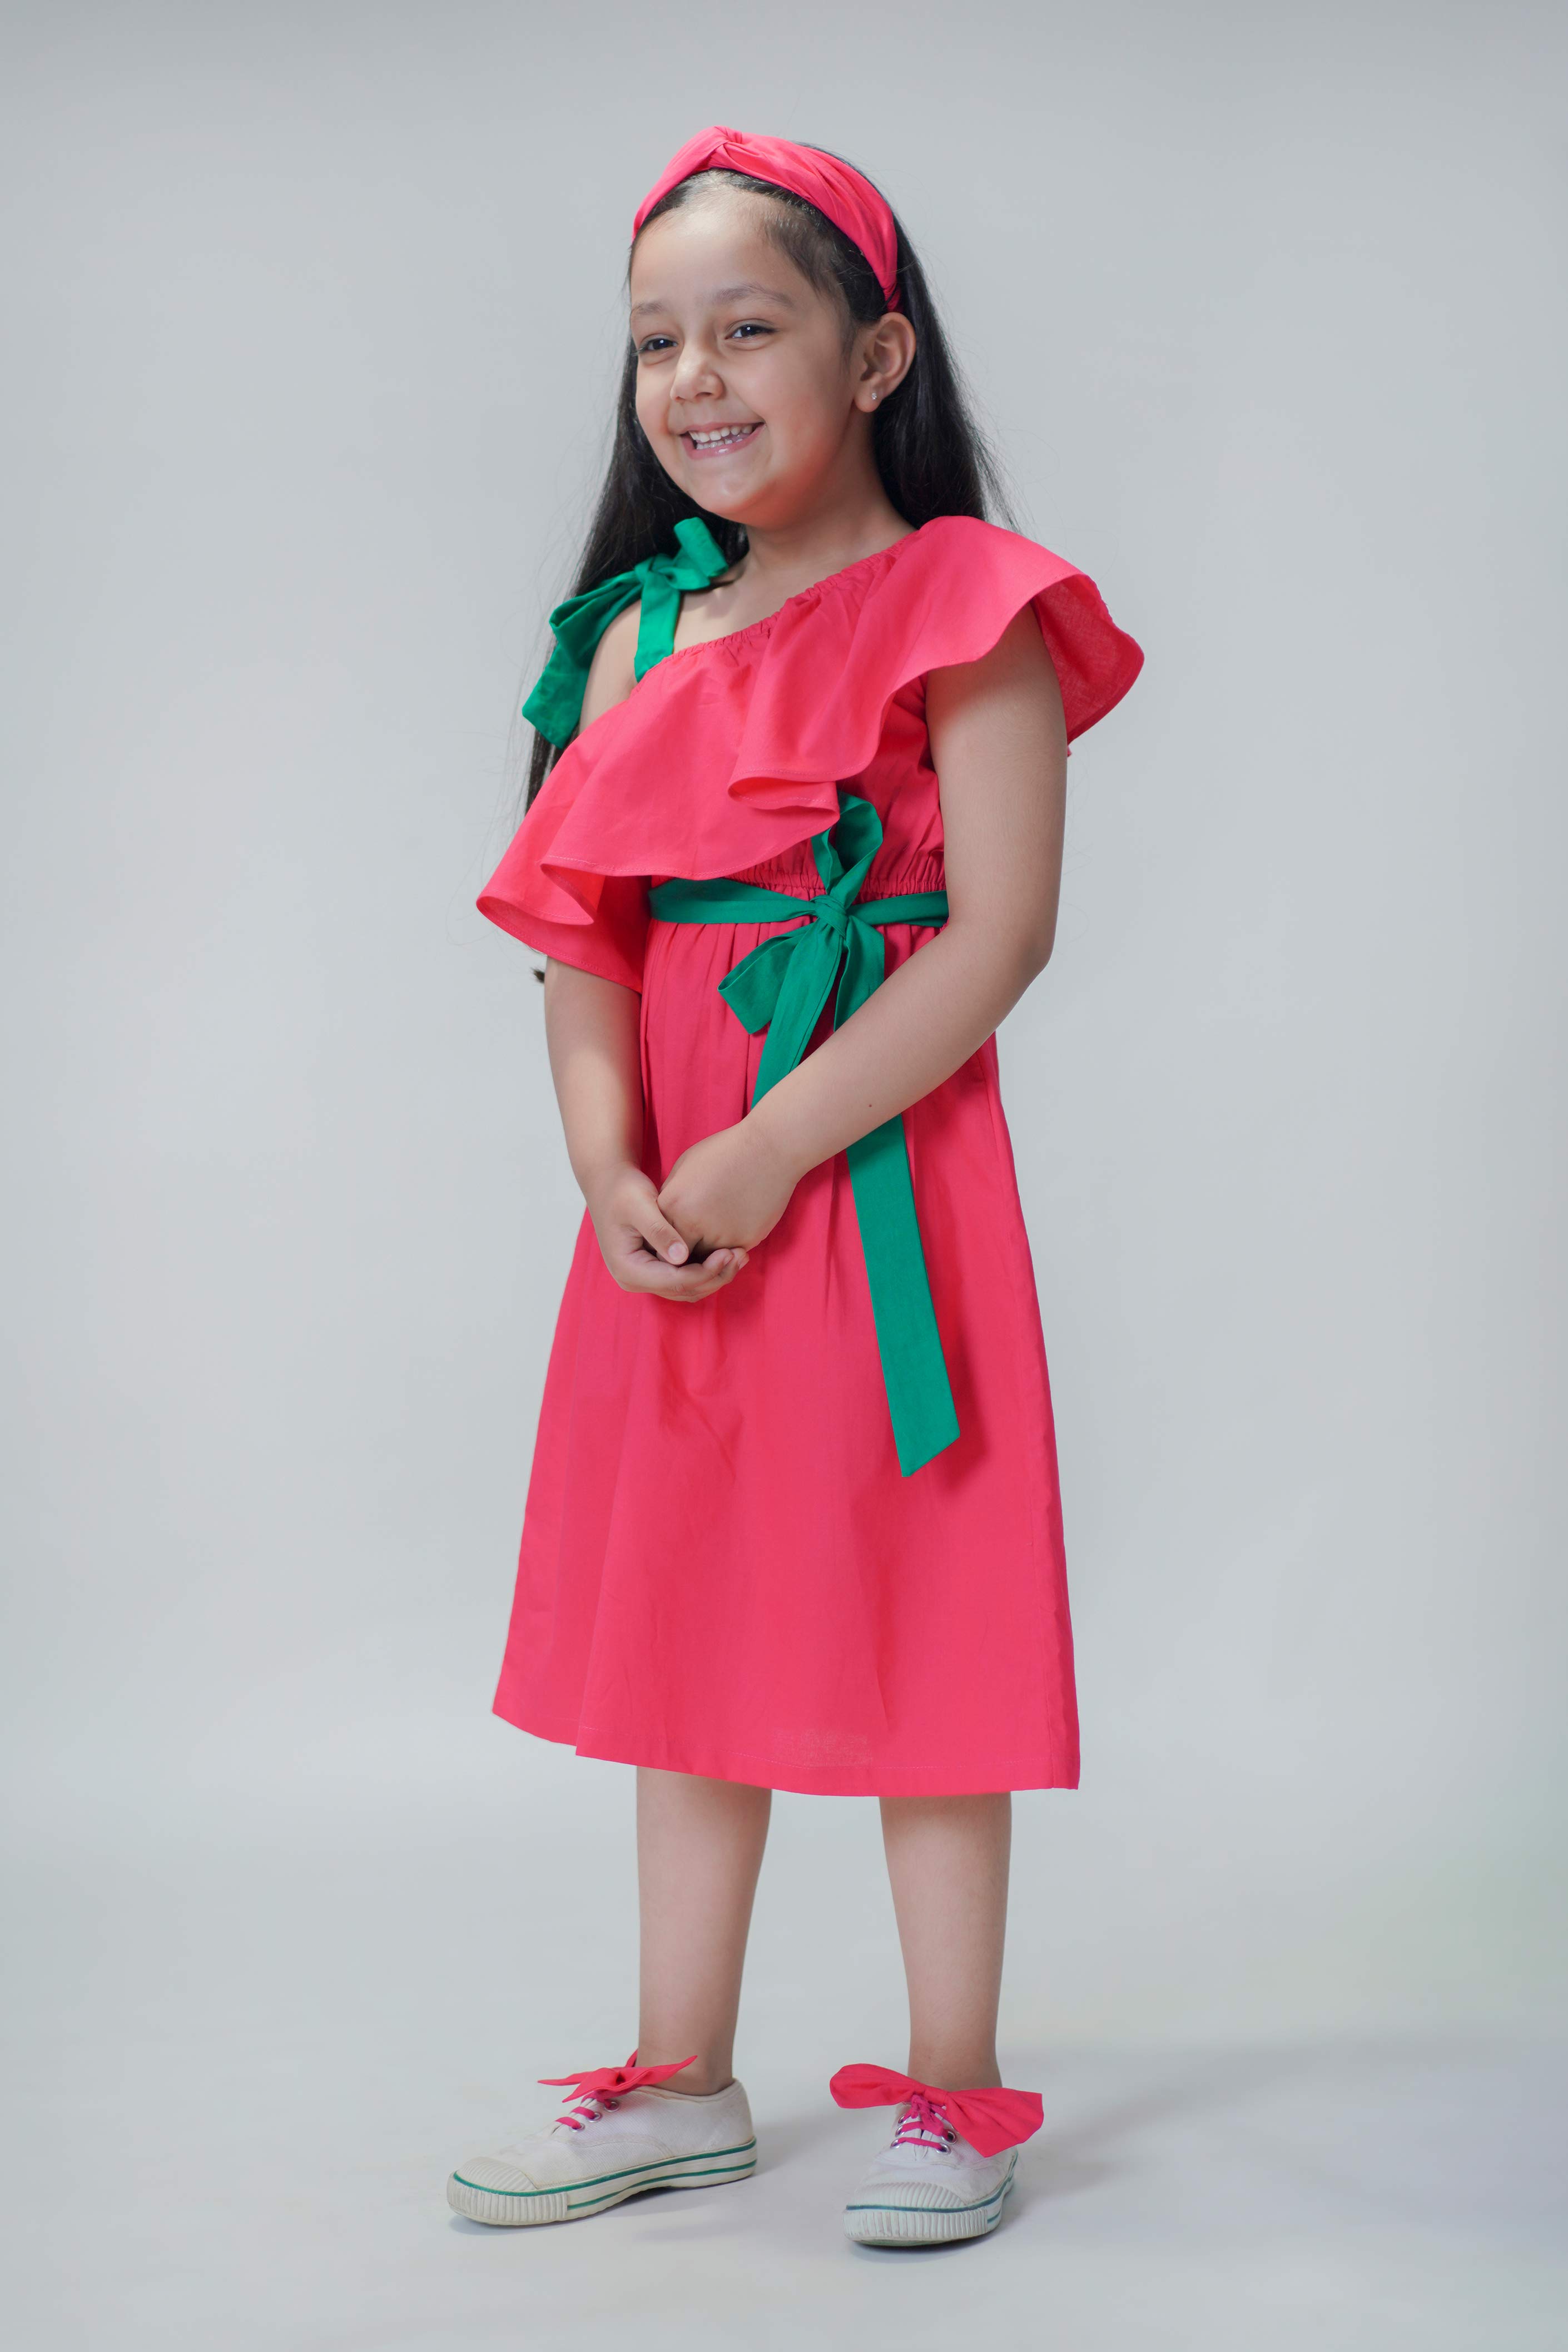 Tri Colour Dress Ideas for kids on 26th January Republic Day